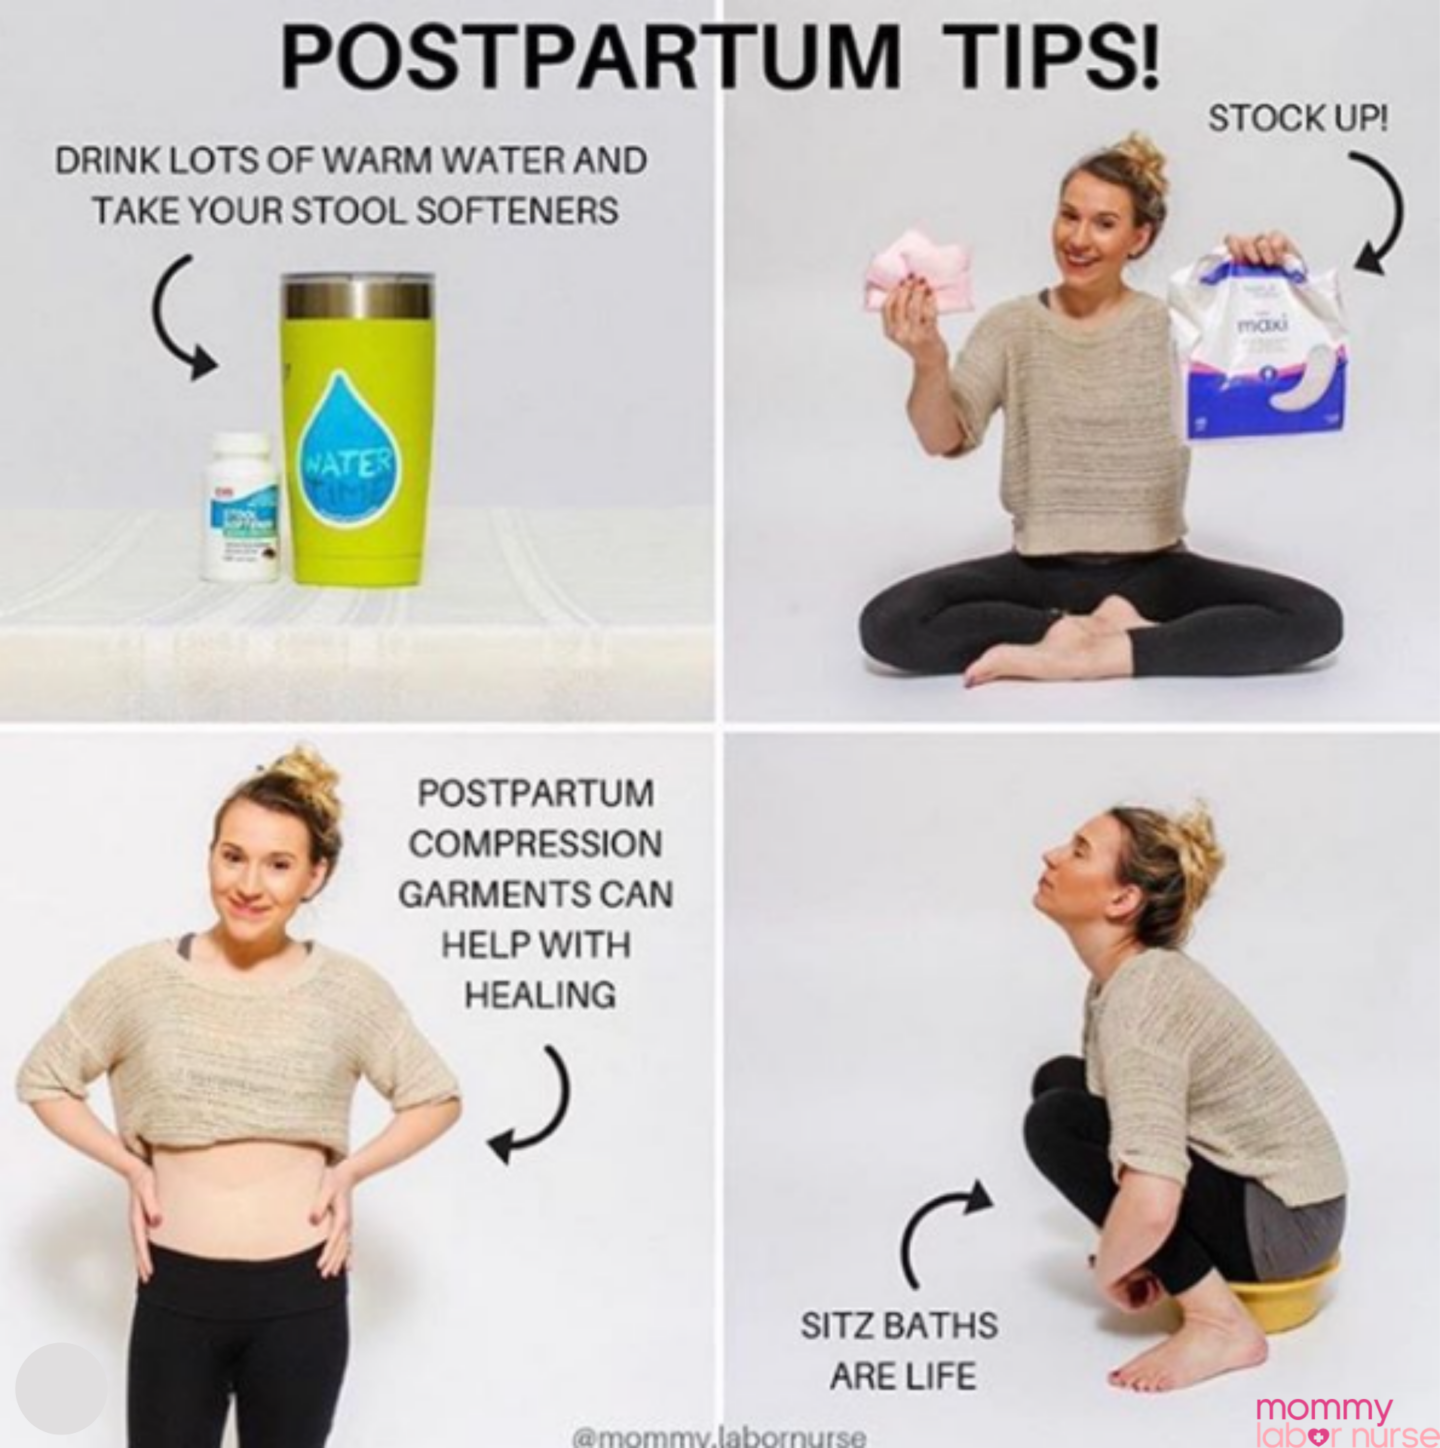 7 Postpartum Recovery Tips To Live Your Best Postpartum Life!